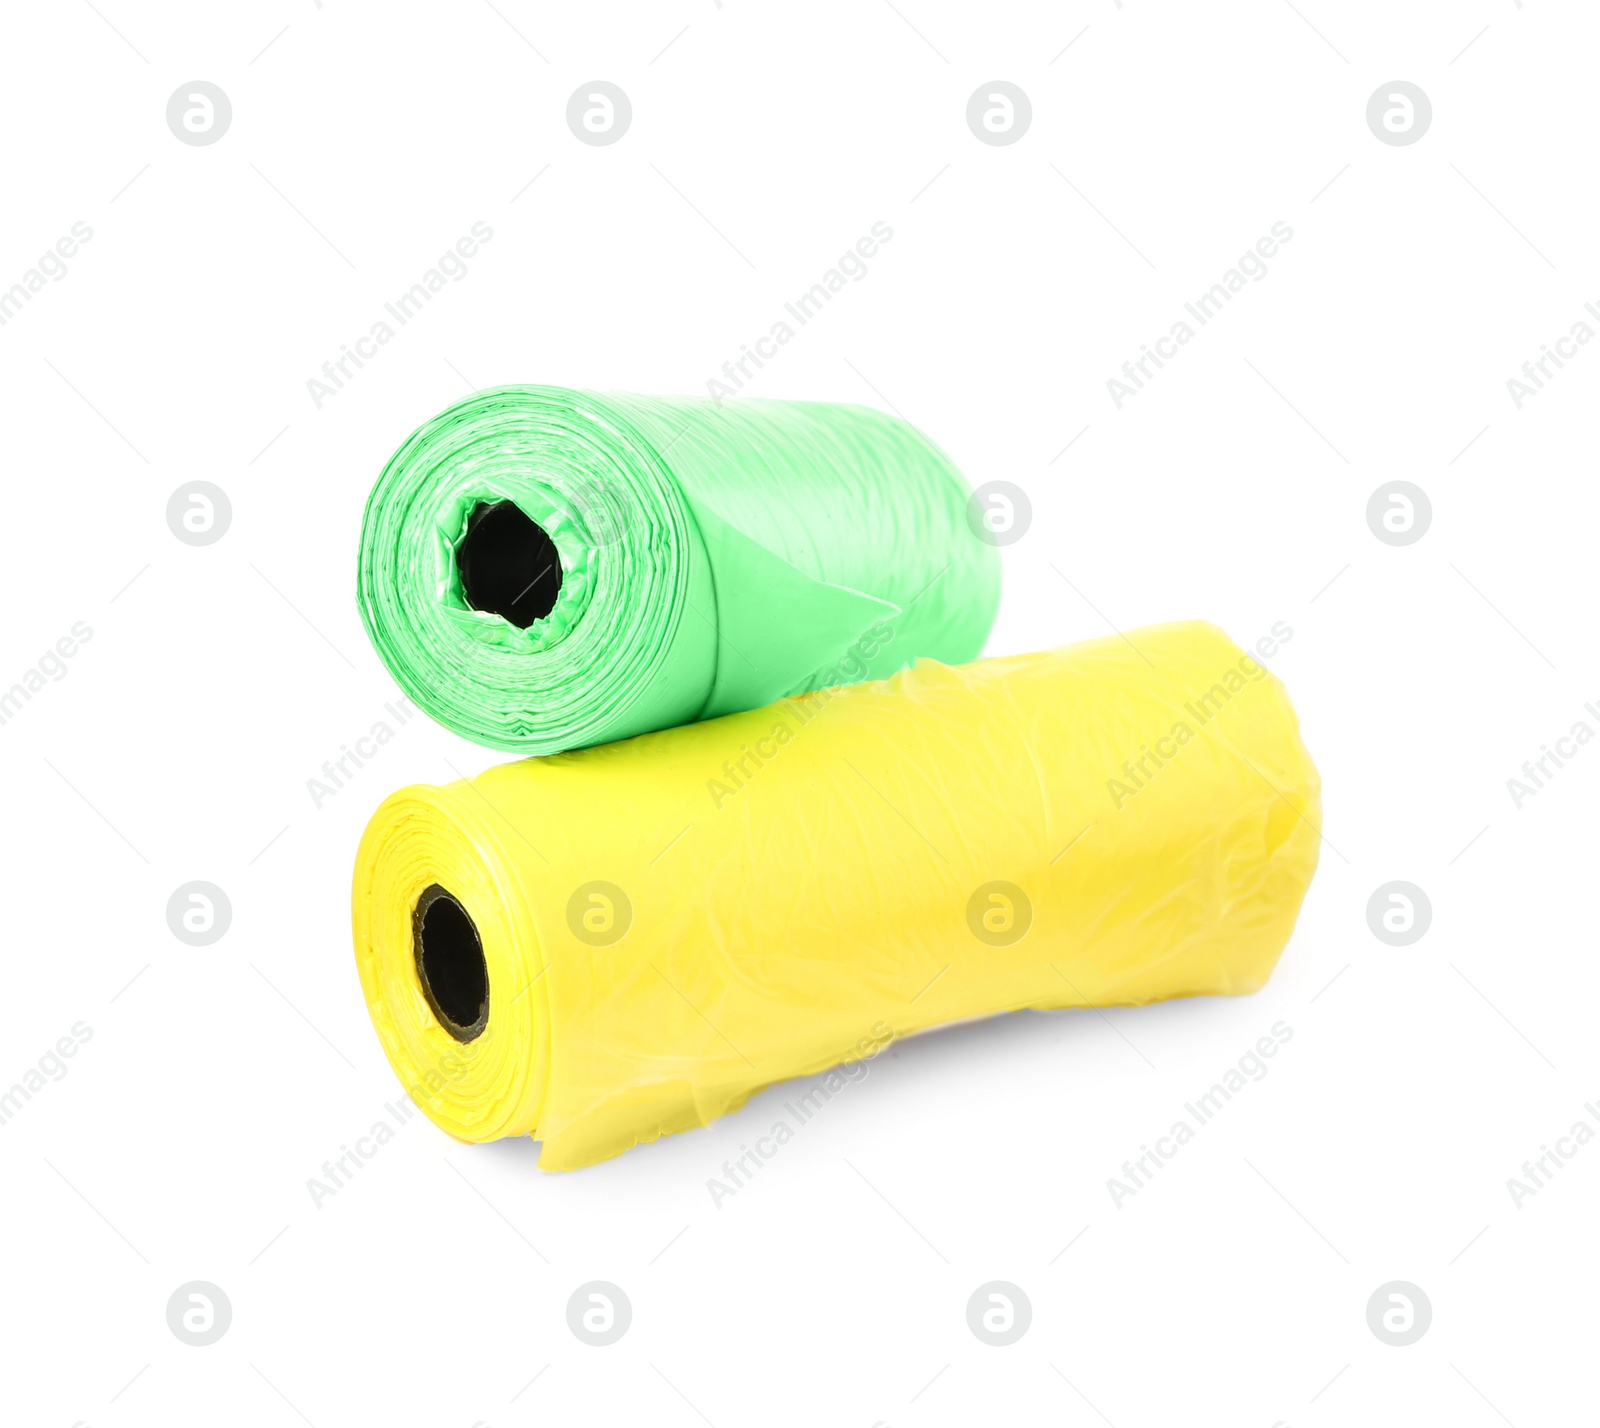 Photo of Colorful dog waste bags on white background